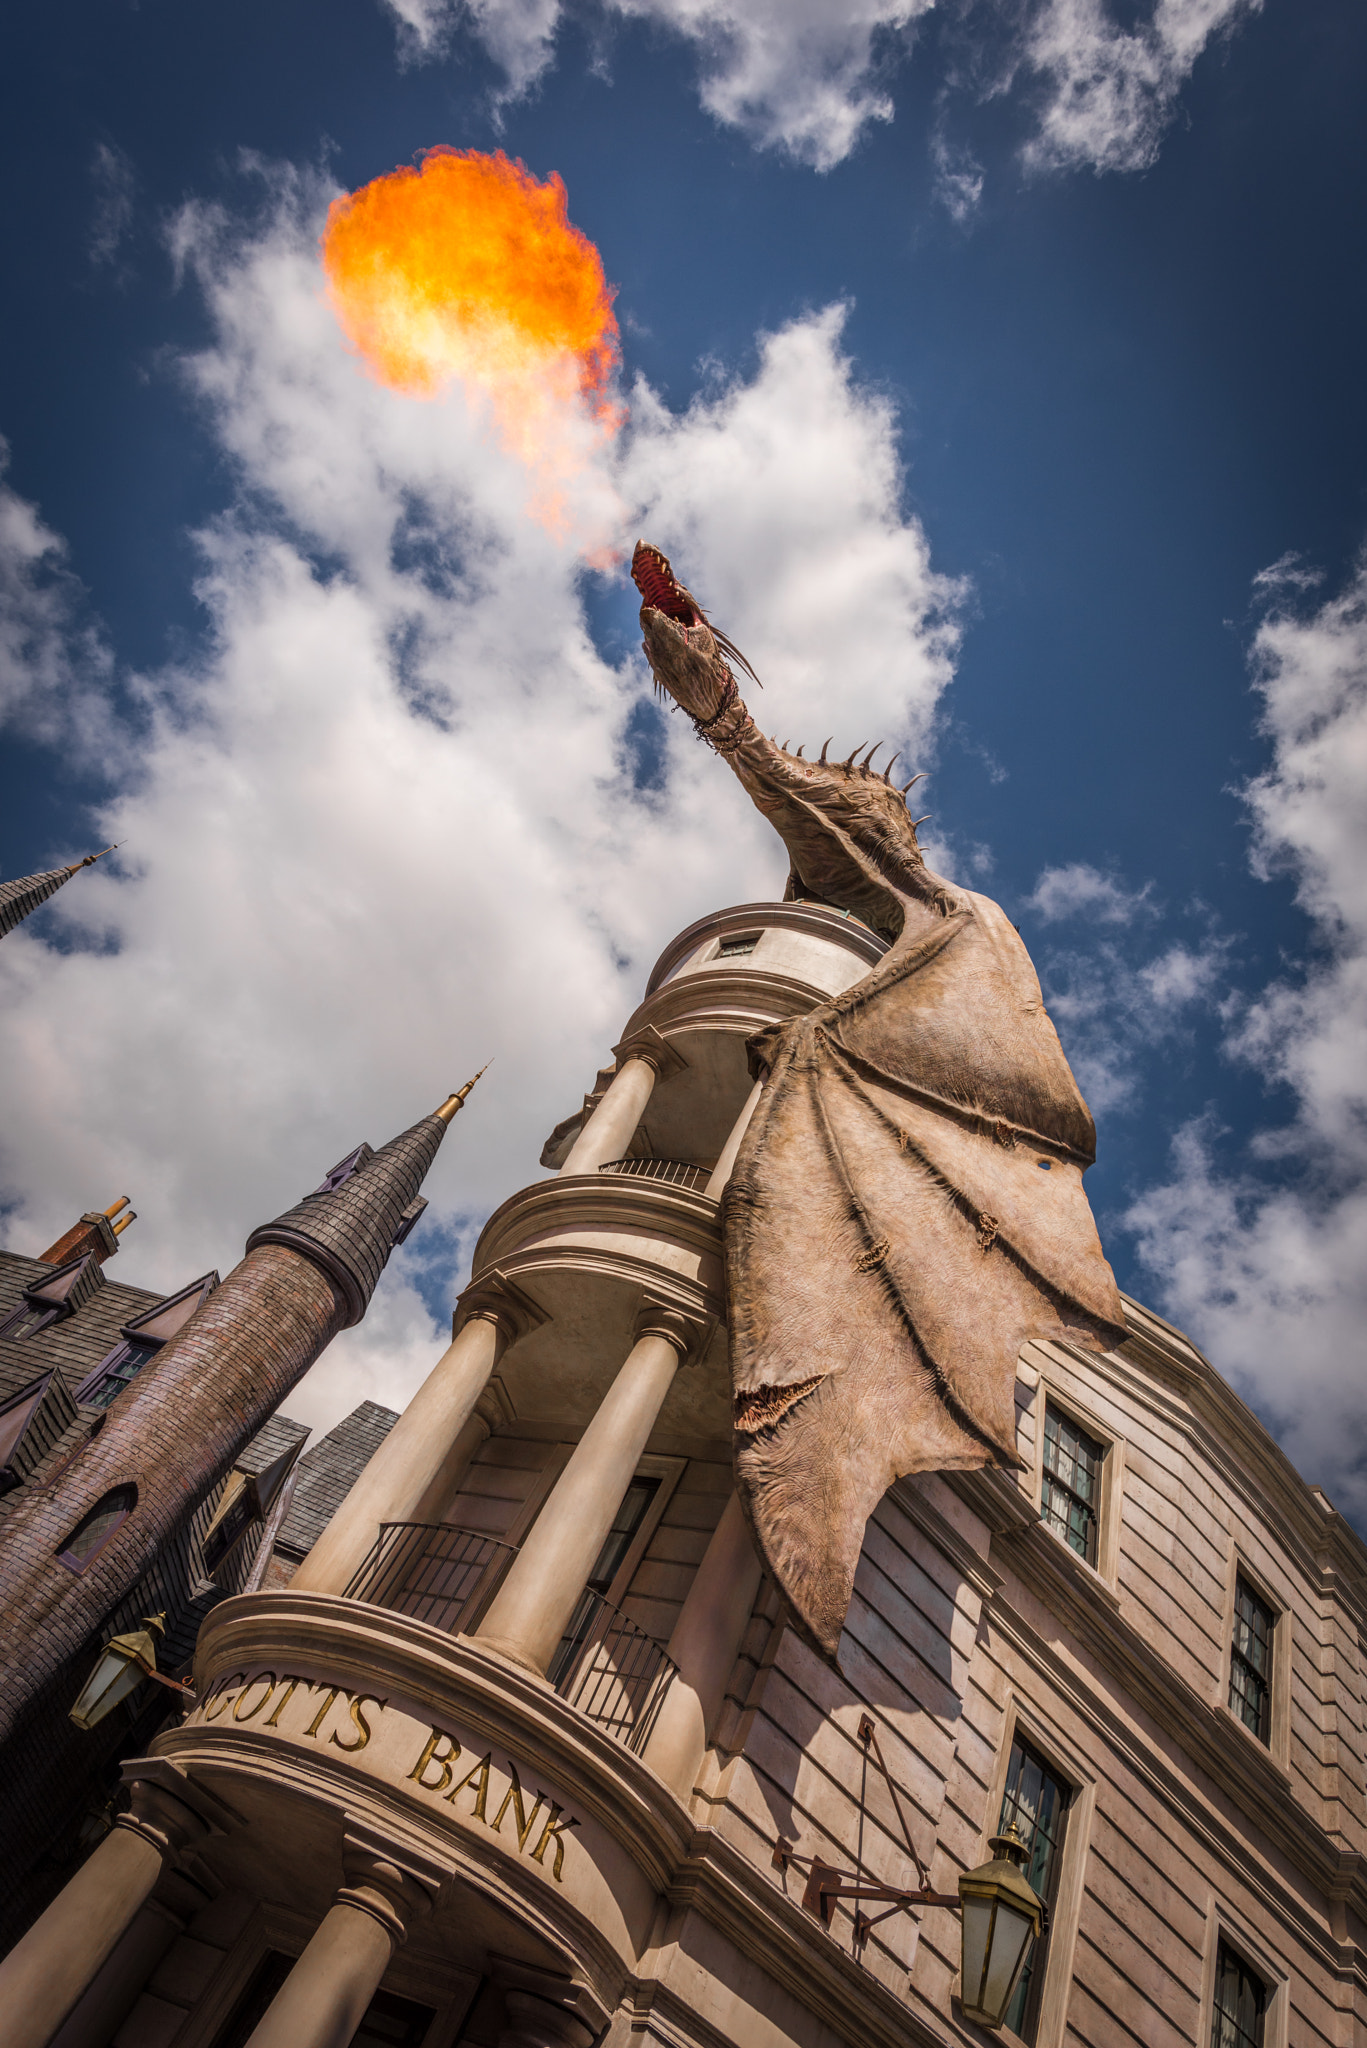 A fire breathing dragon at Diagon Alley